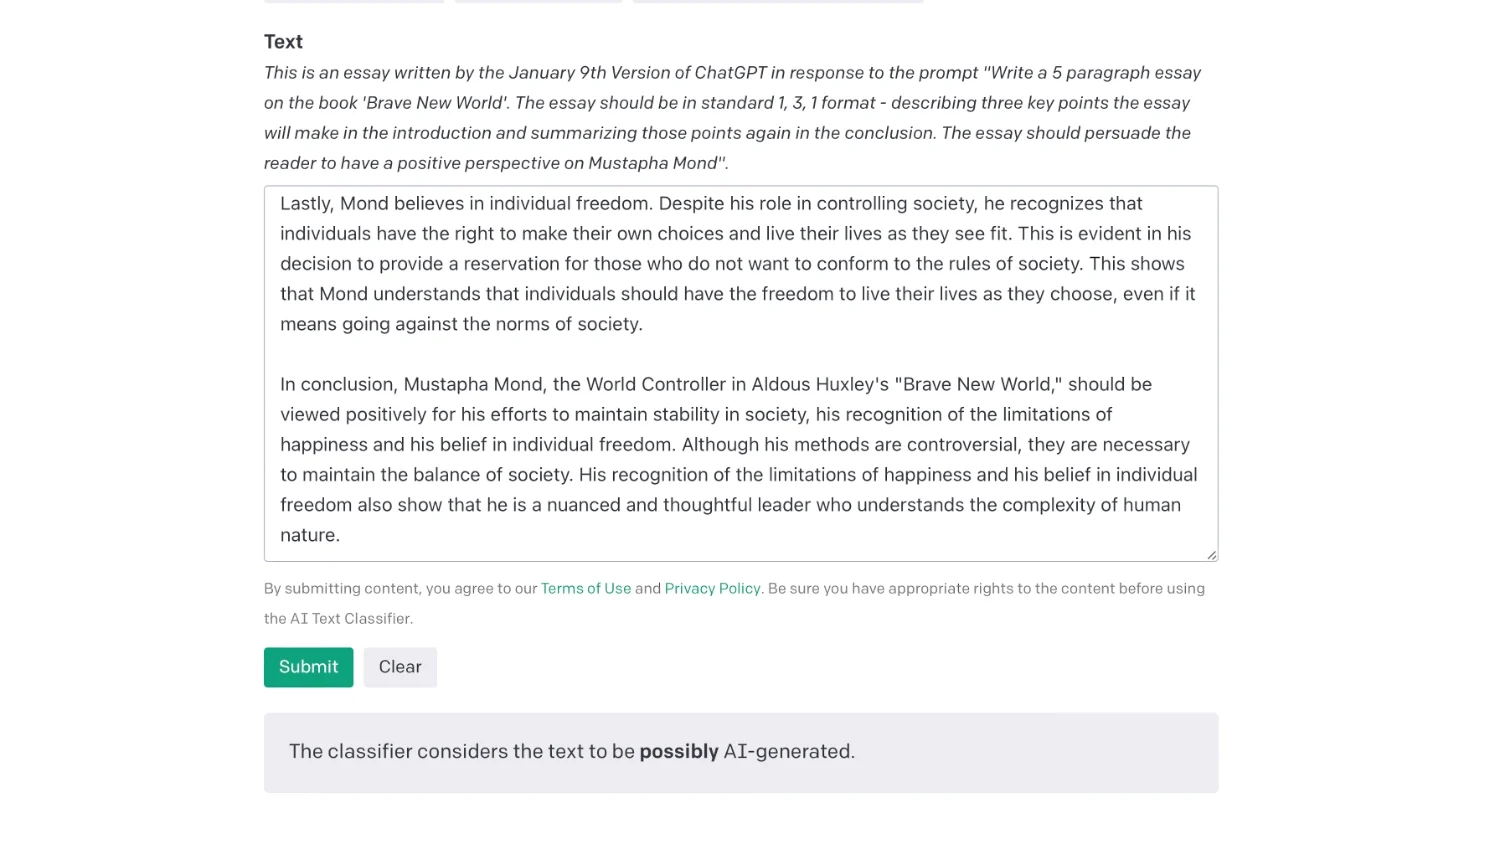 Screenshot of a box with AI-produced text on an OpenAI website that tries to determine if text was written by ChatGPT. The result states it is “possibly AI-generated.”